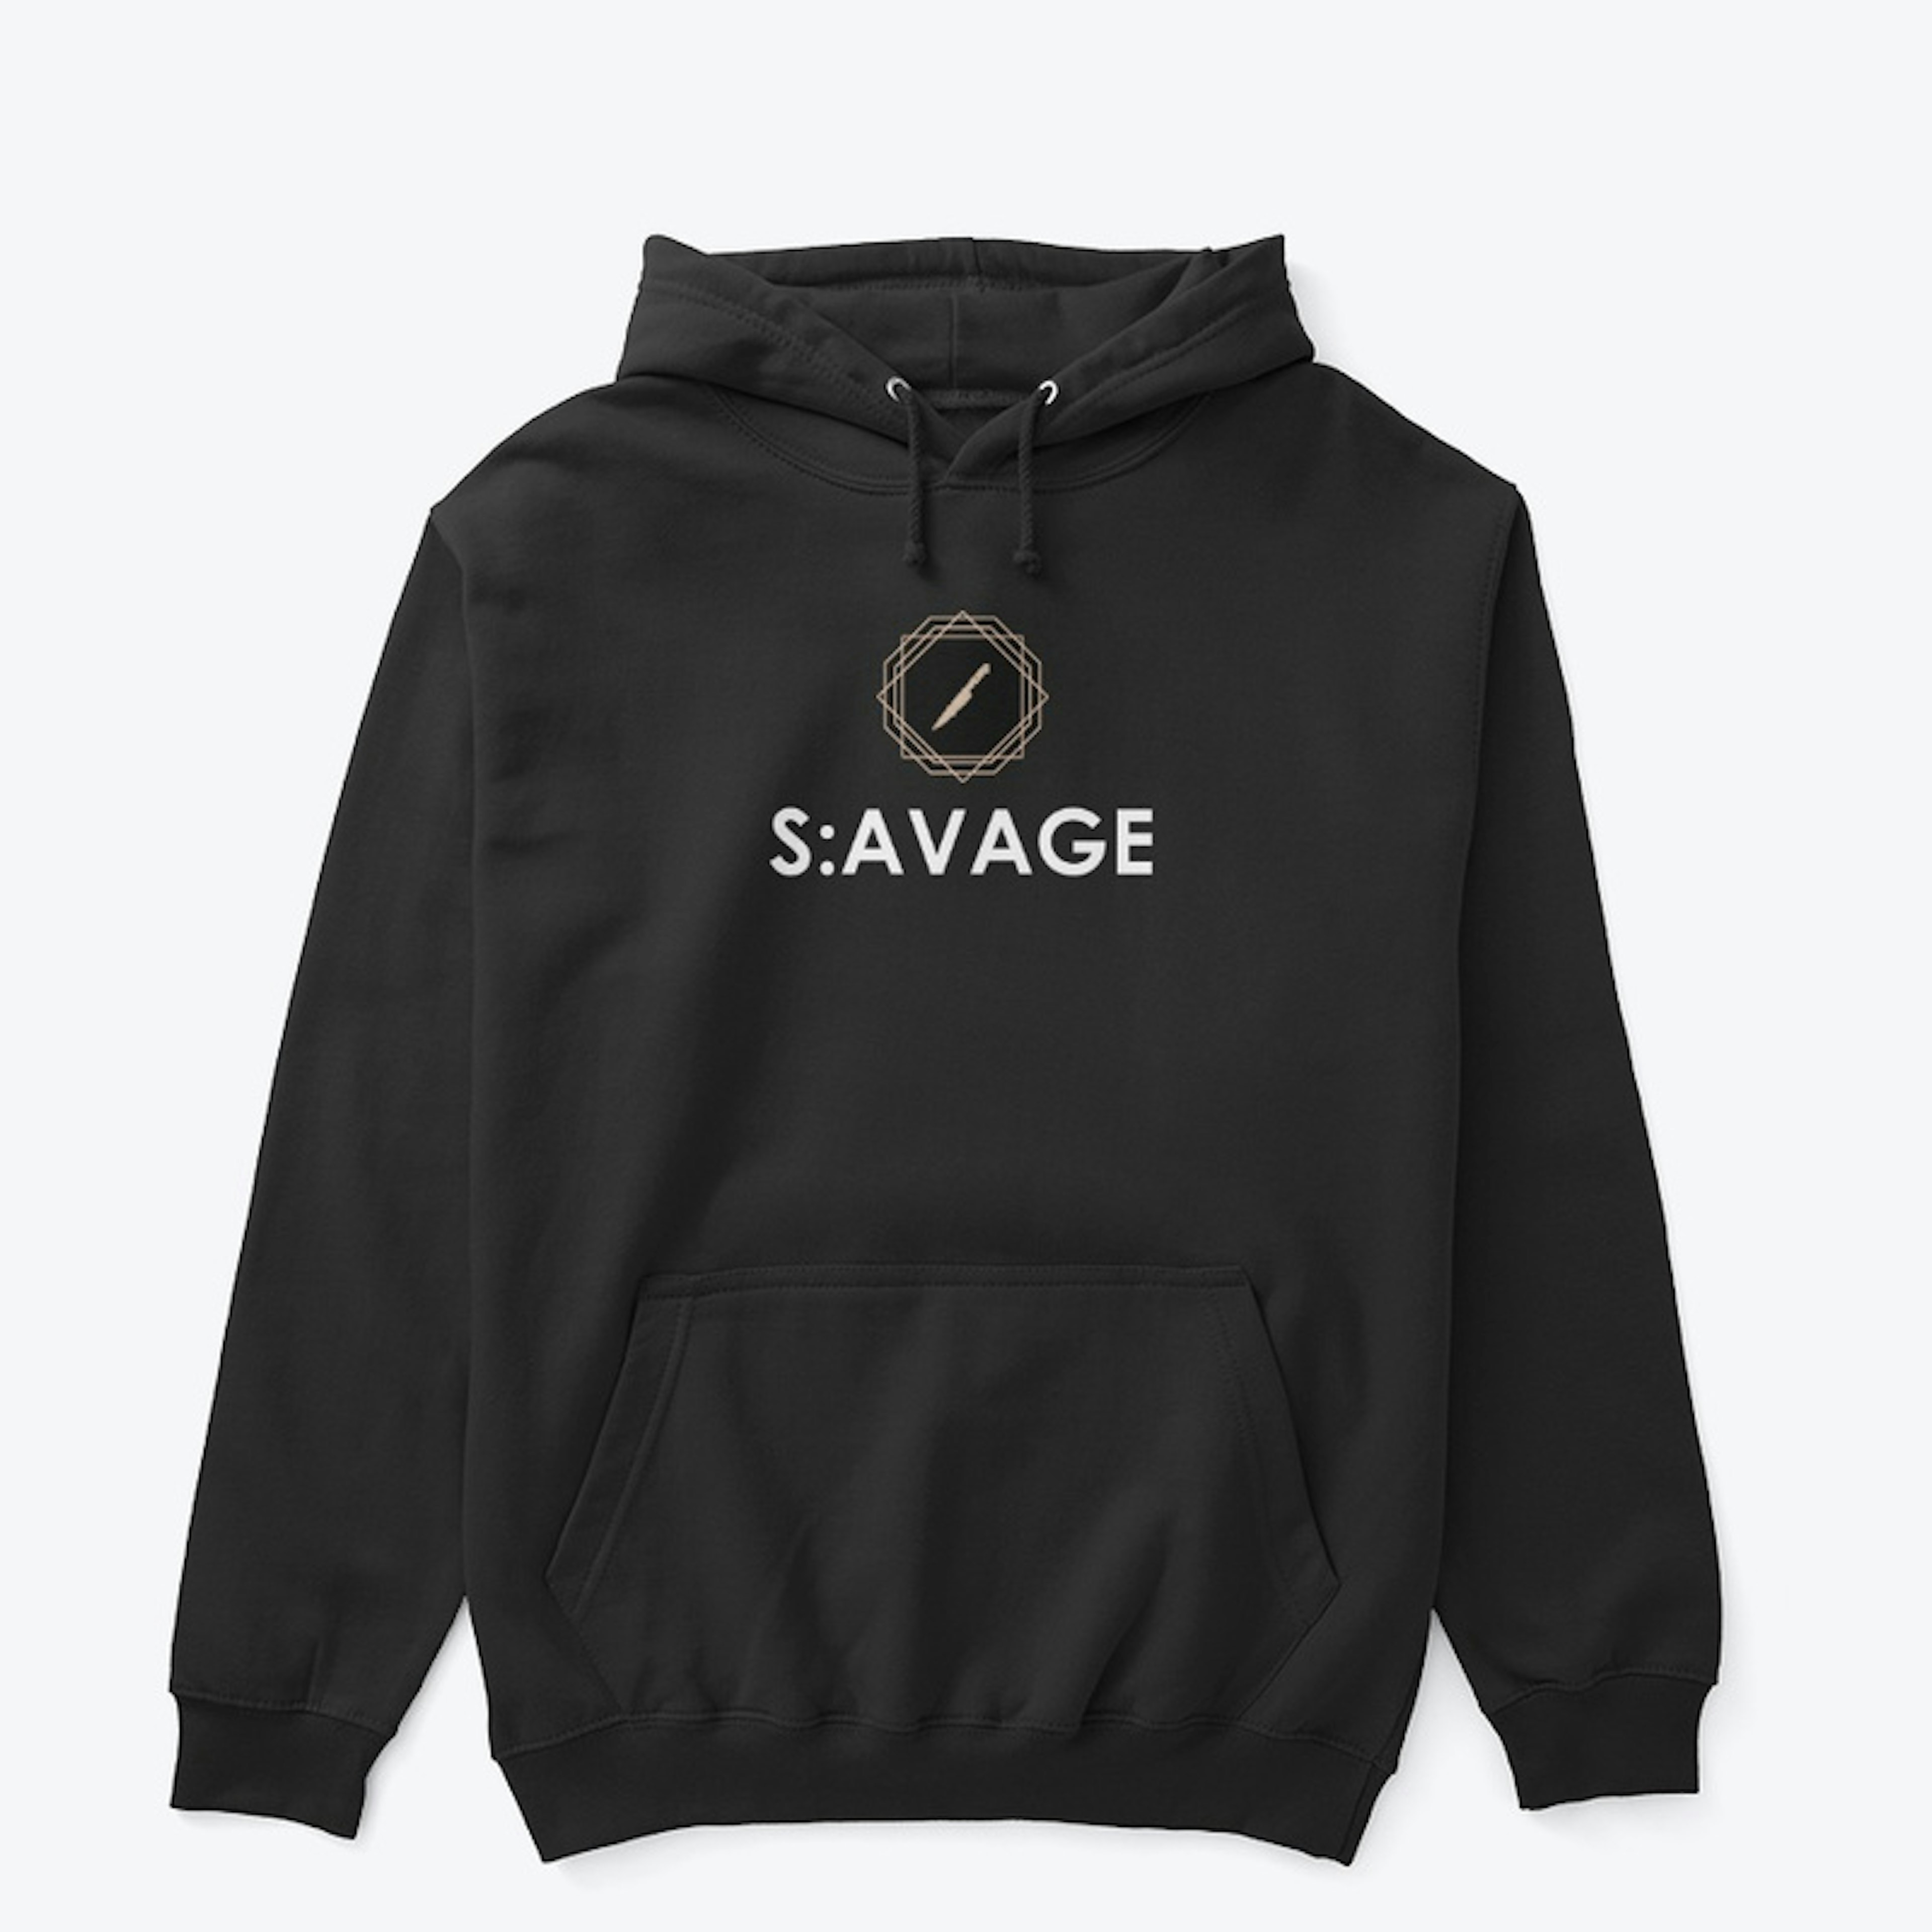 S:AVAGE